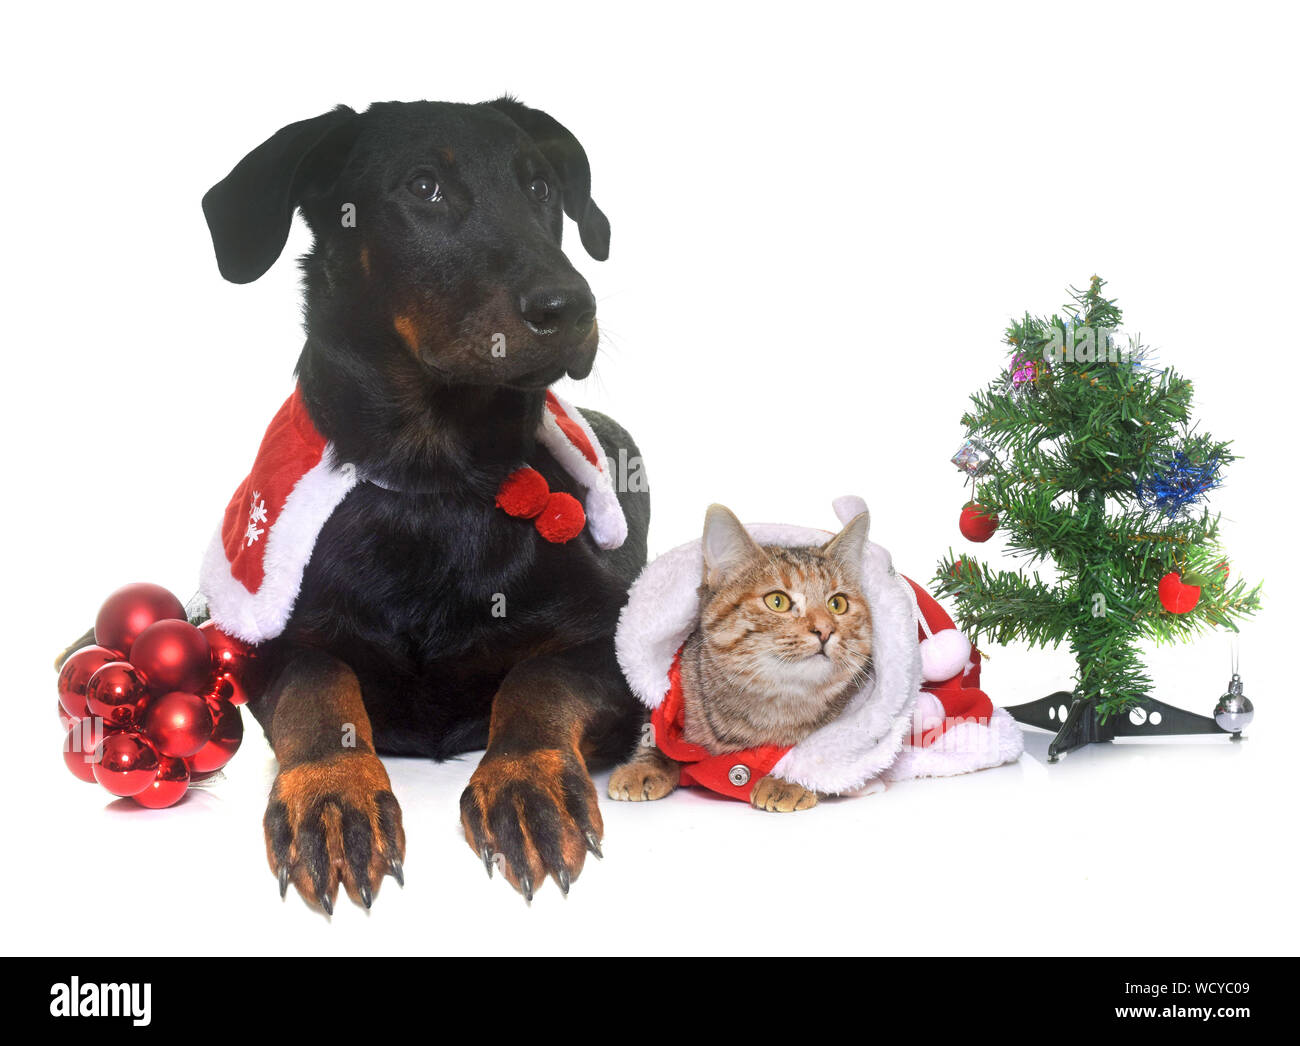 Dog And Cat Wearing Christmas Costume Against White Background Stock Photo